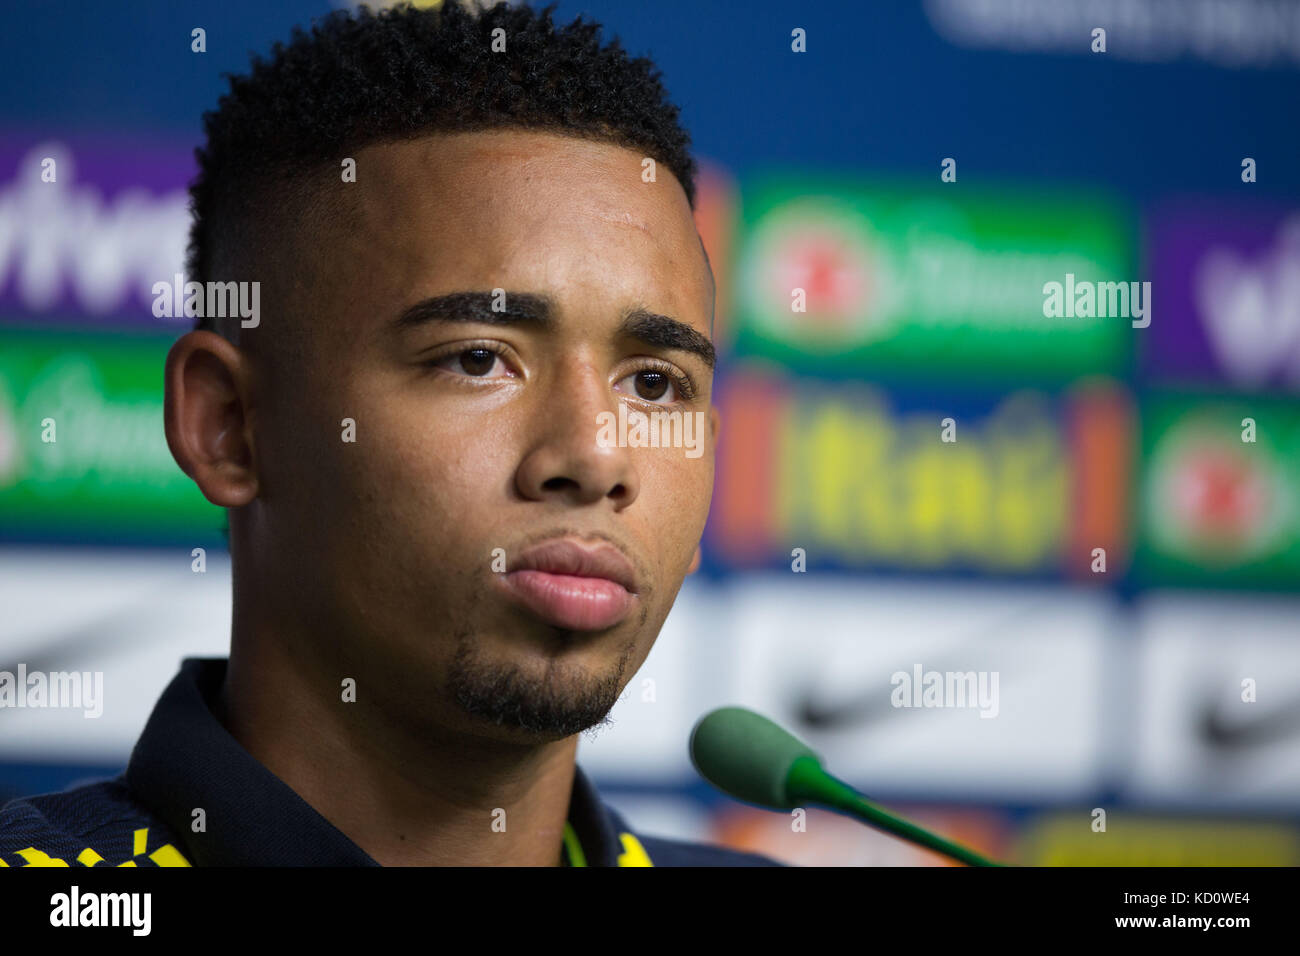 Sao Paulo, Sao Paulo, Brazil. 8th Oct, 2017. Brazil's soccer player GABRIEL JESUS attends a press conference after the training session of the Brazil's national soccer team in Sao Paulo, Brazil, before the match against Chile, for the qualifiers of the upcoming Russia 2018 World Cup. Credit: Paulo Lopes/ZUMA Wire/Alamy Live News Stock Photo